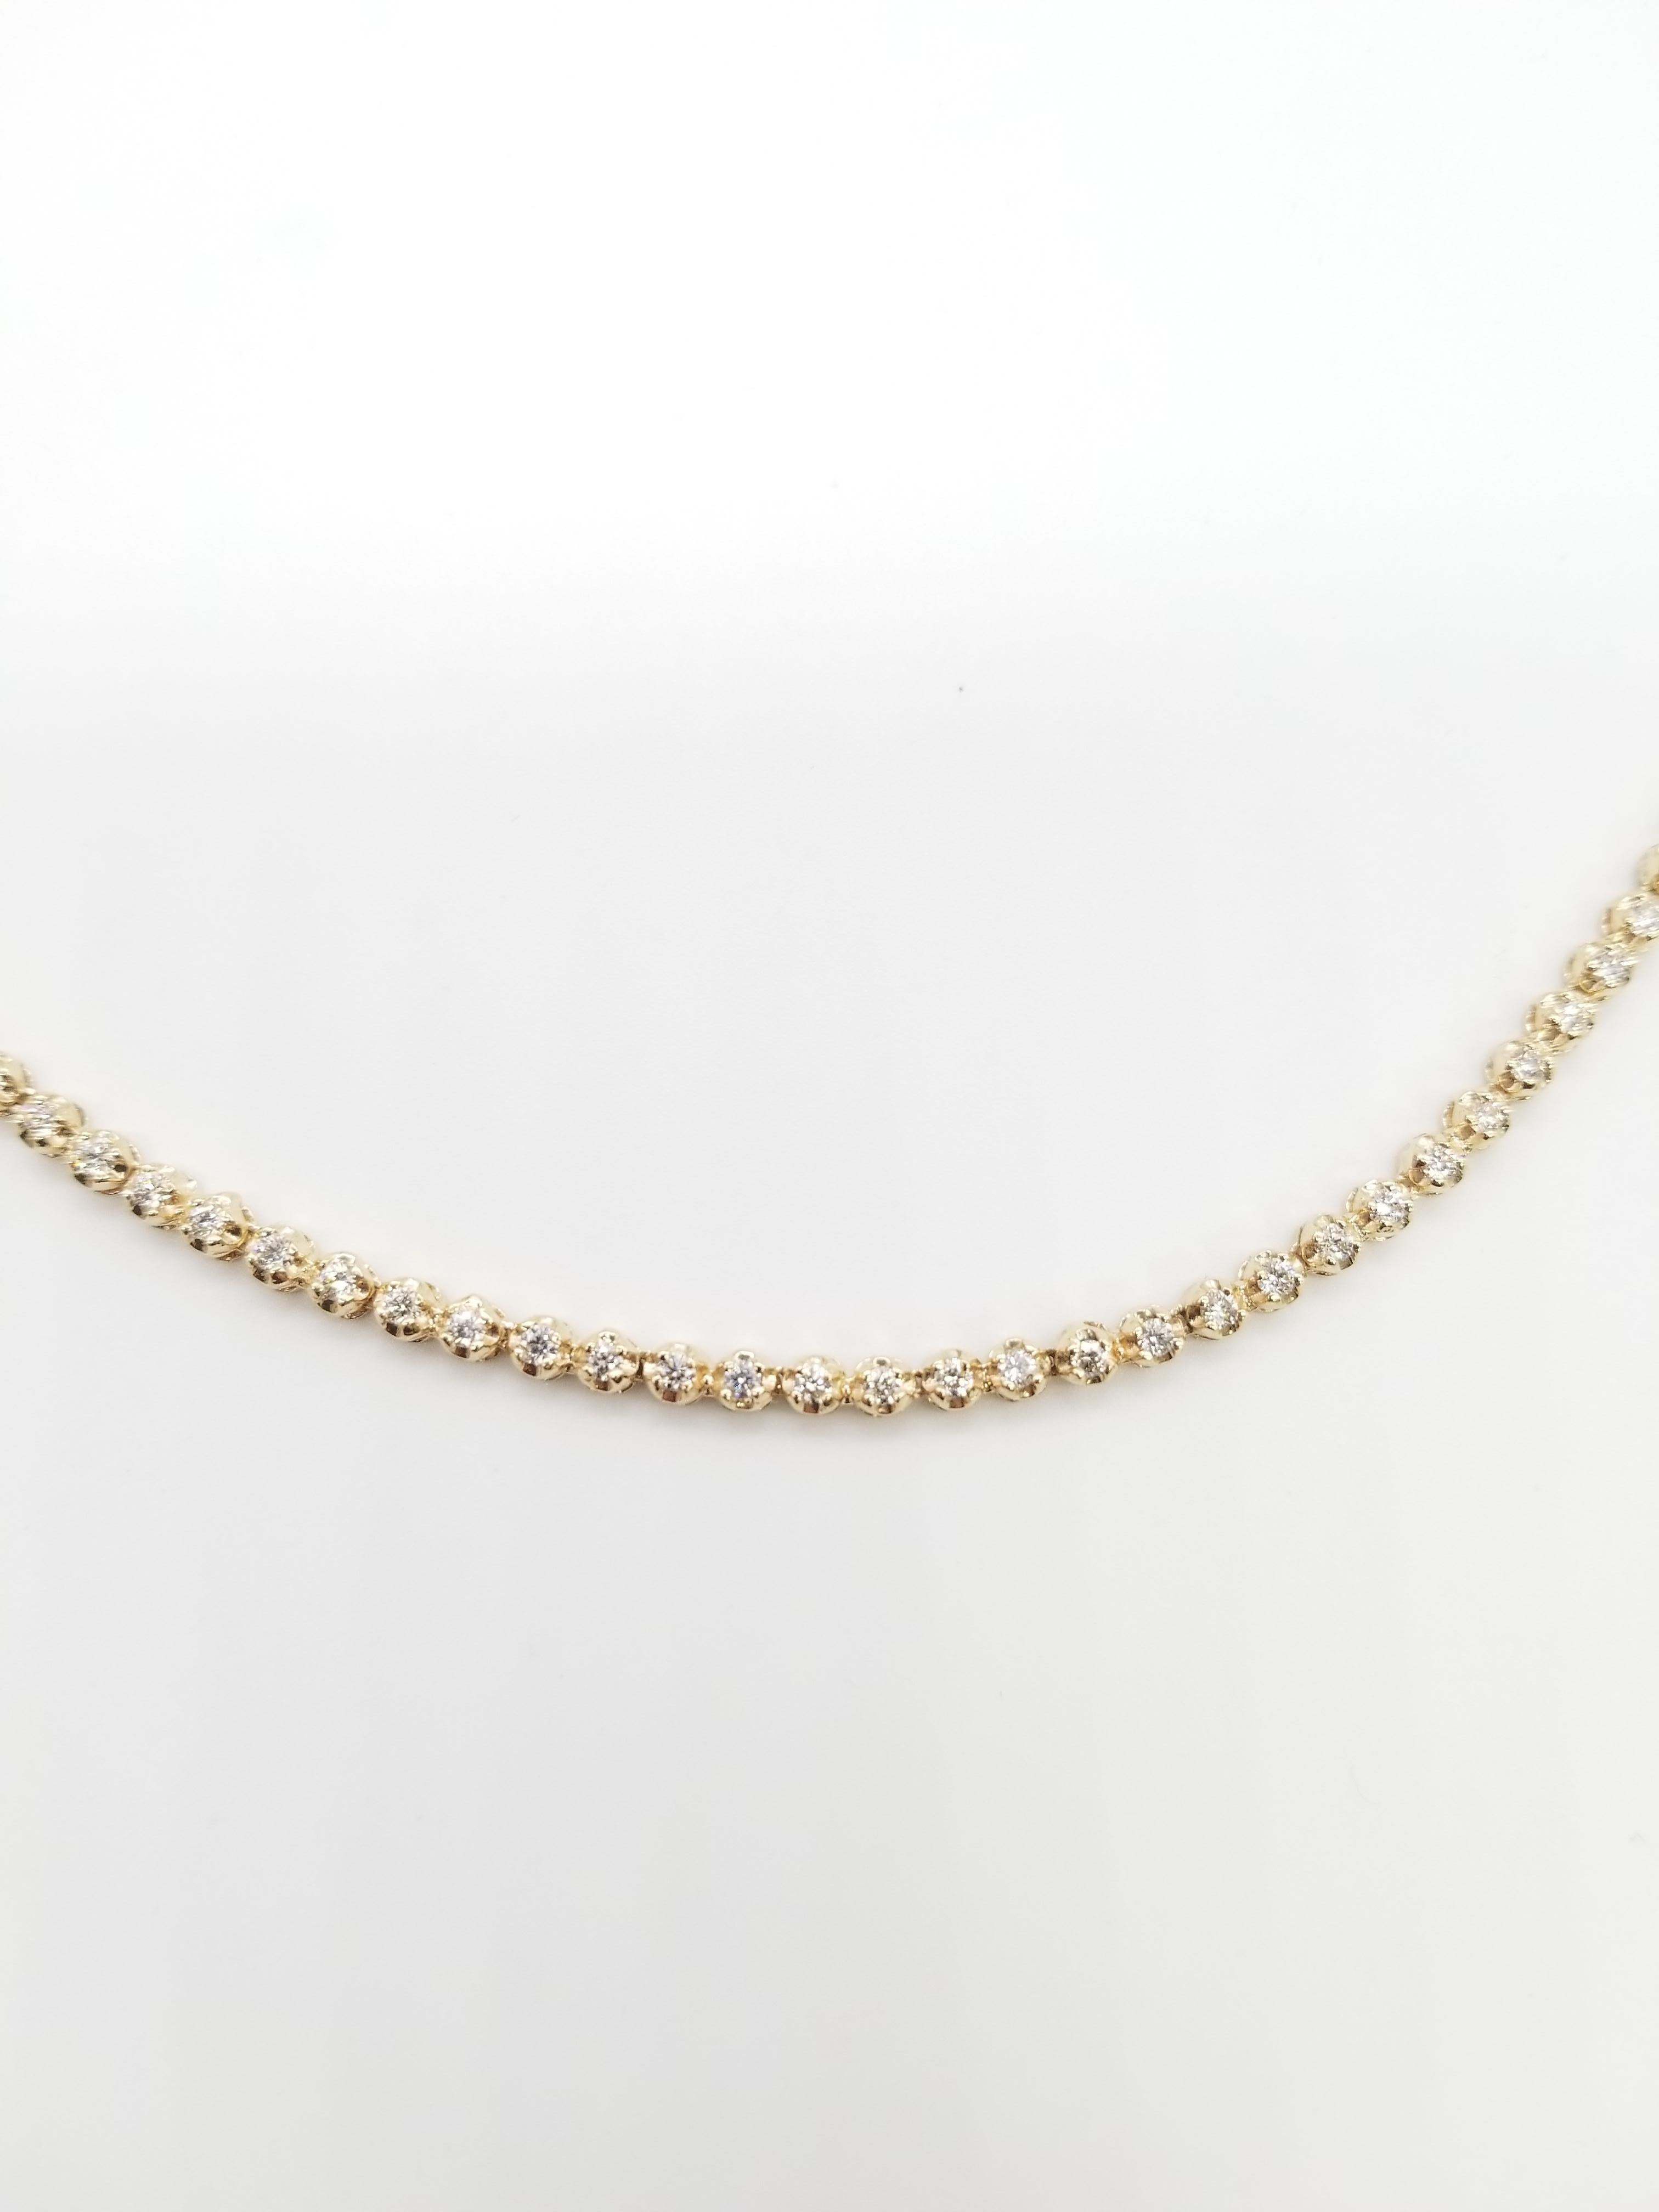 4.50 Carat Buttercup Round Brilliant Diamond Necklace 14 Karat Yellow Gold 20'' In New Condition For Sale In Great Neck, NY